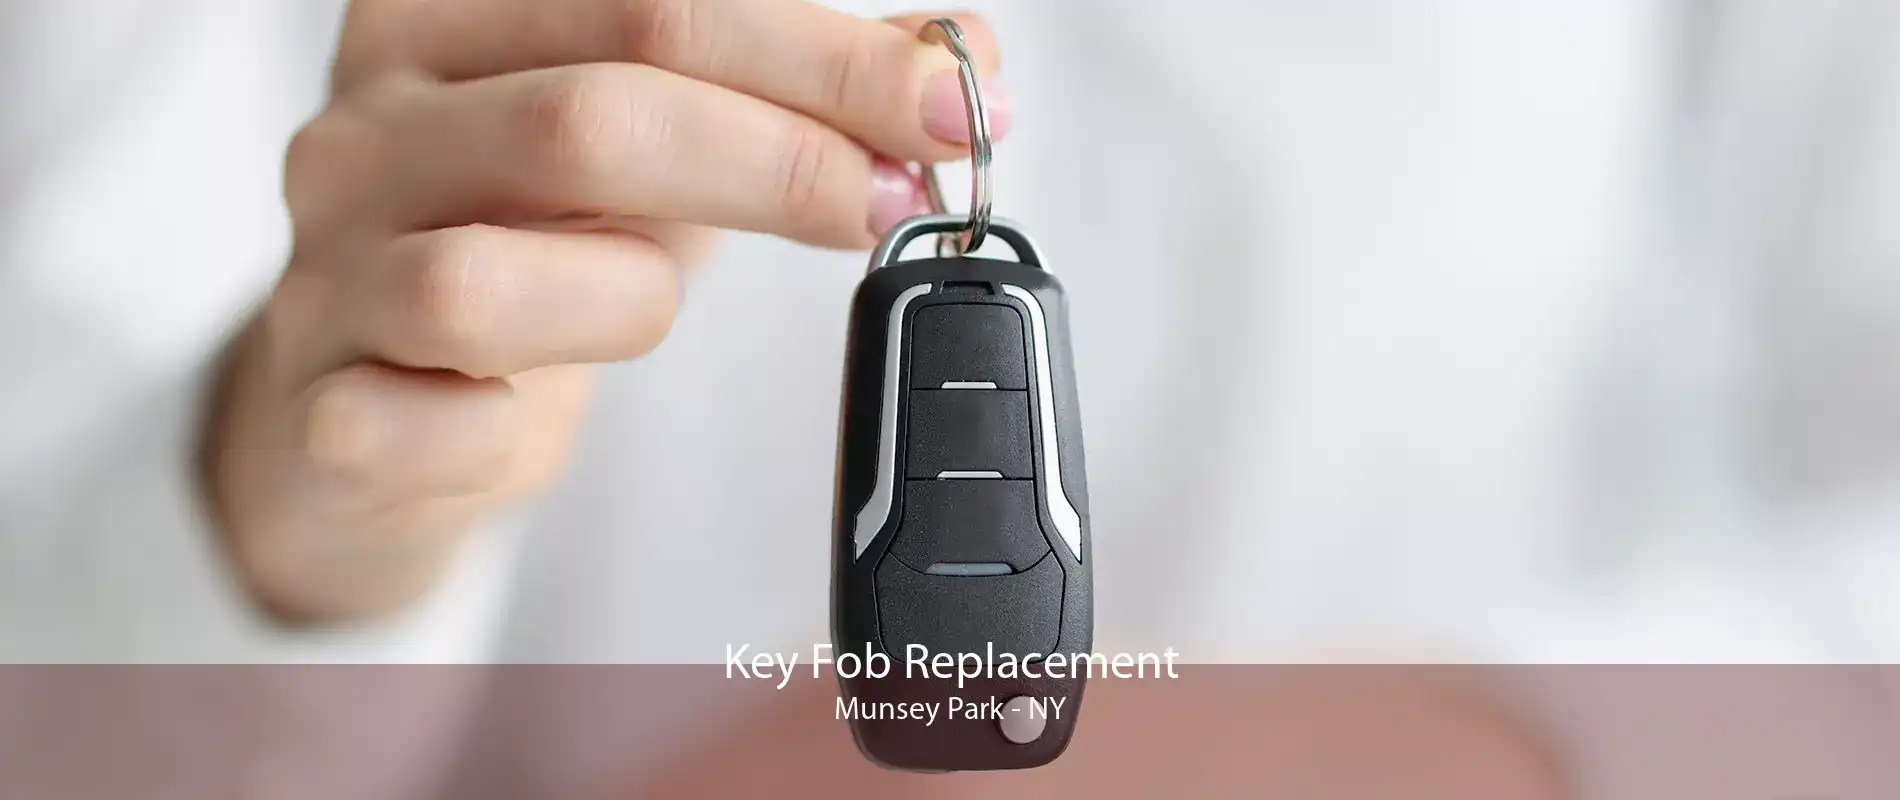 Key Fob Replacement Munsey Park - NY